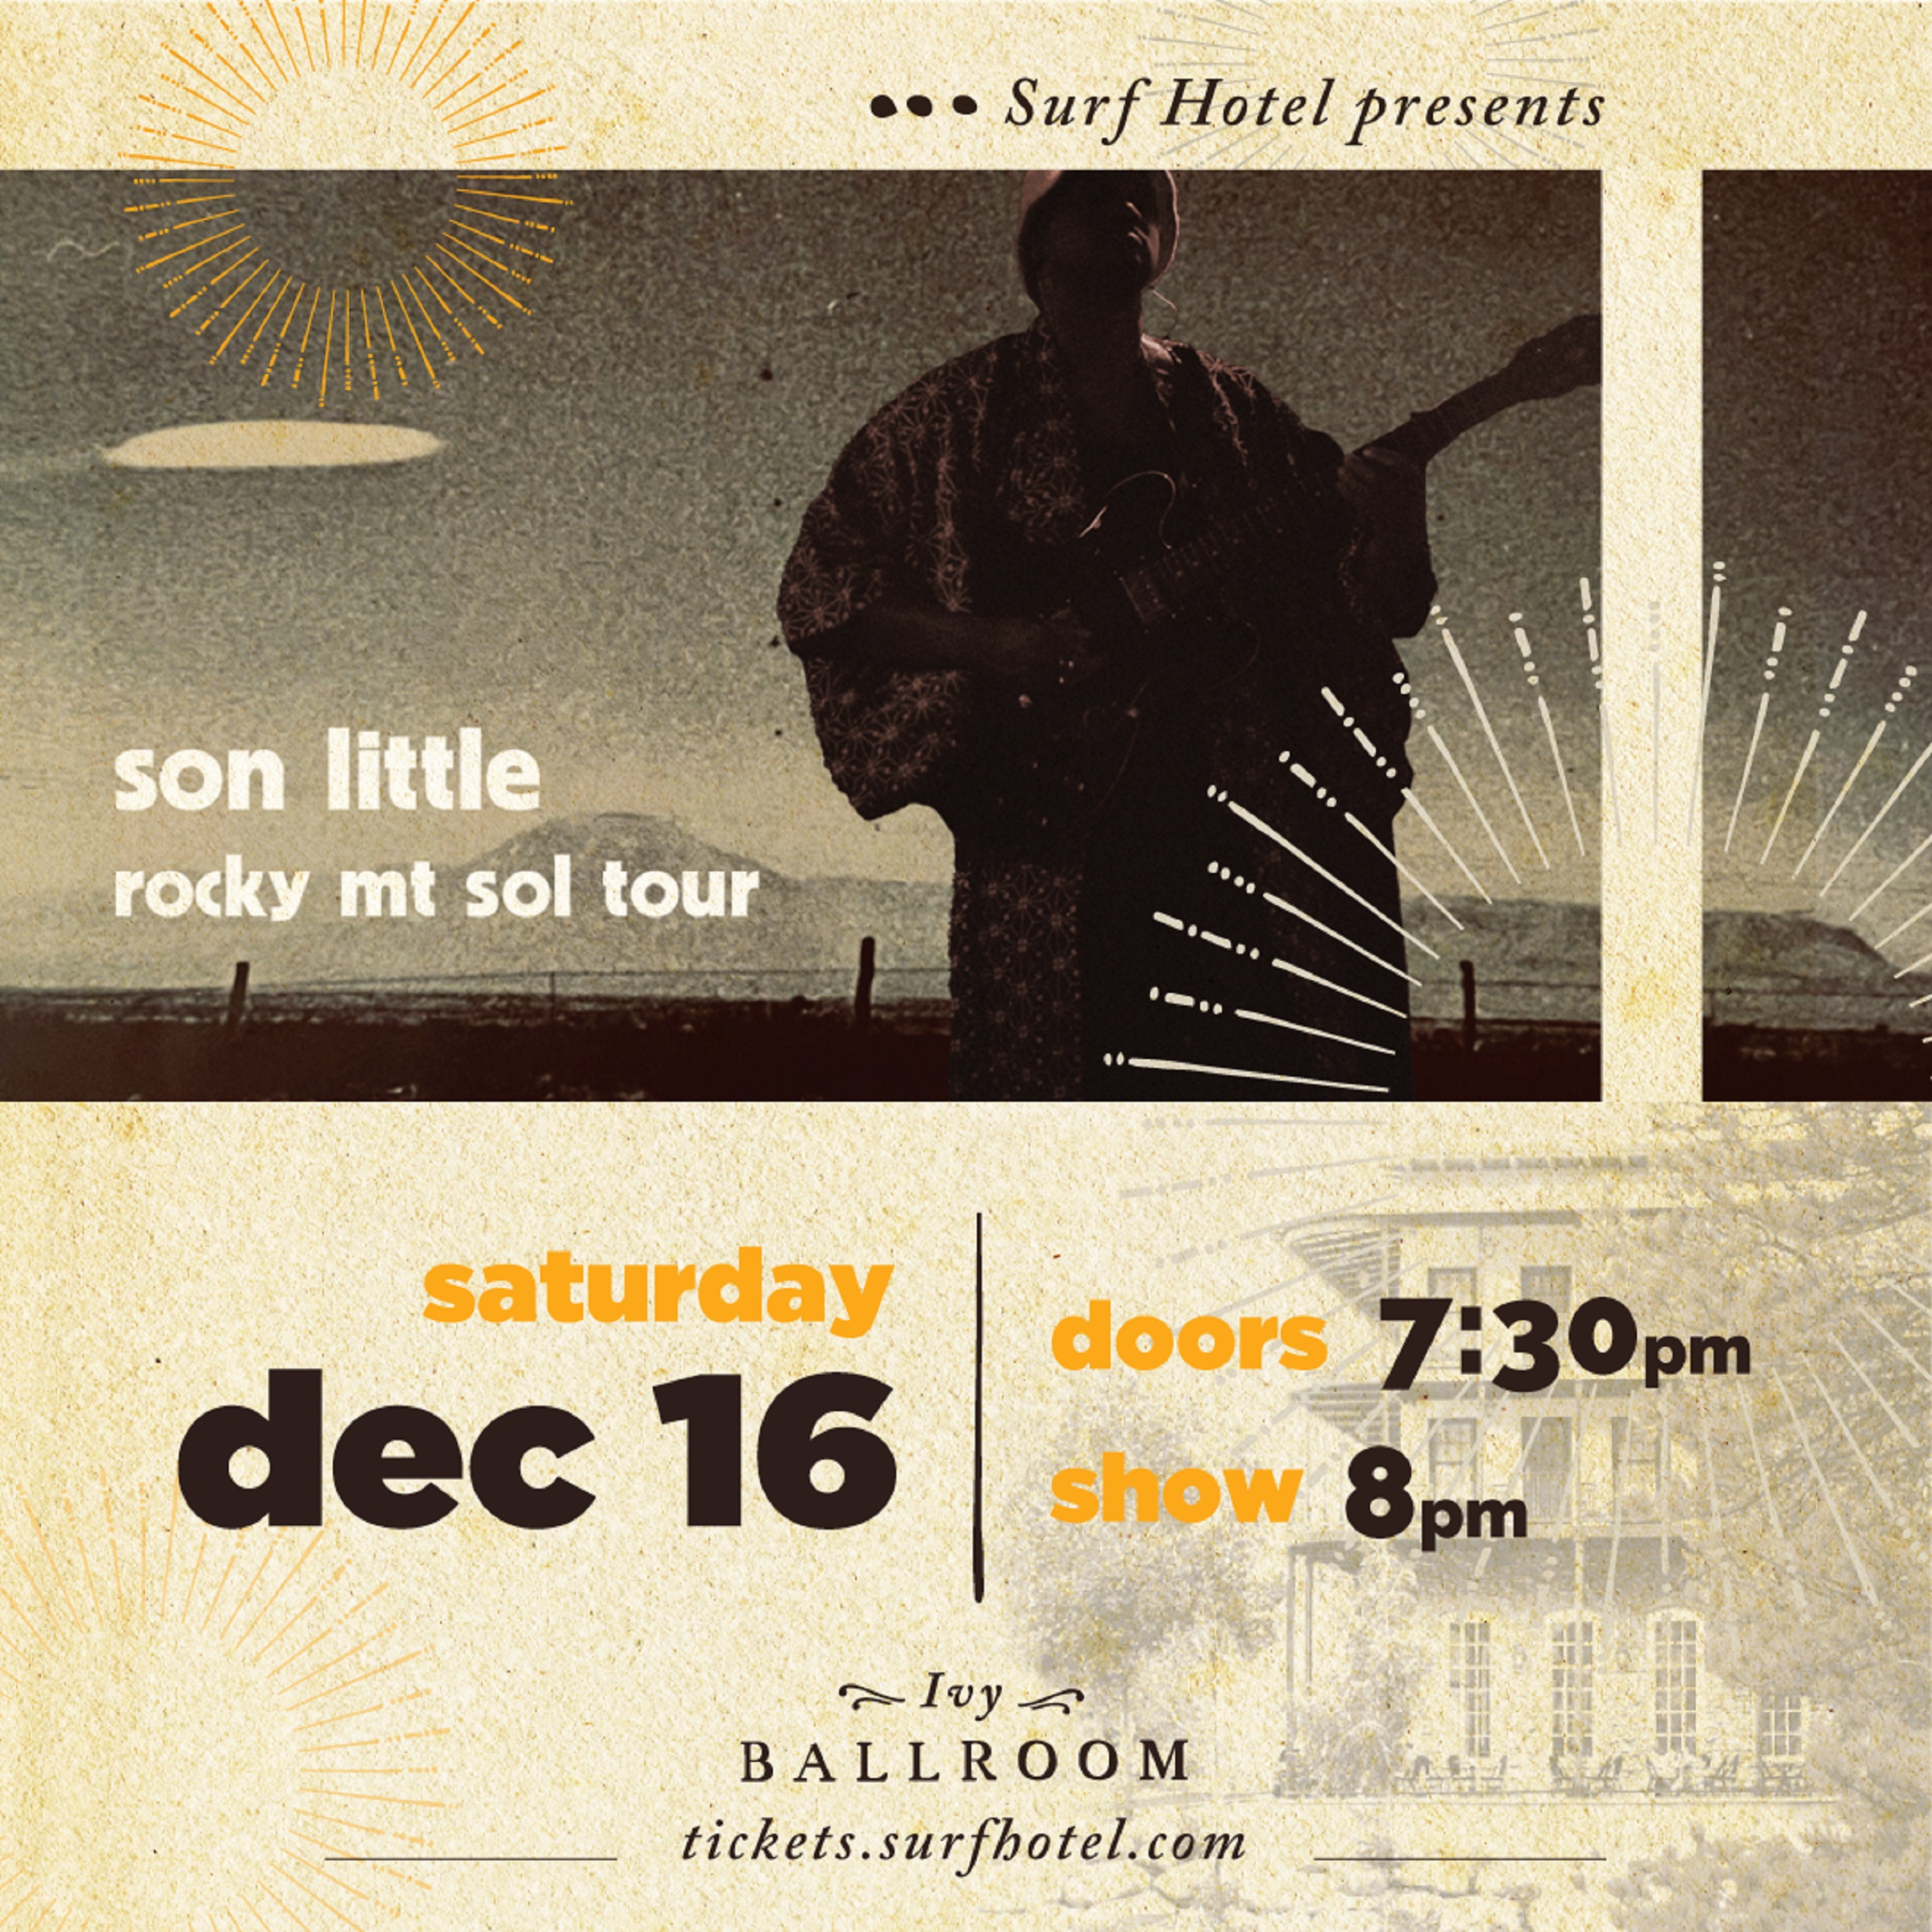 Grammy Winning Artist and Acclaimed Songwriter Son Little To Perform at the Ivy Ballroom on Saturday, December 16th